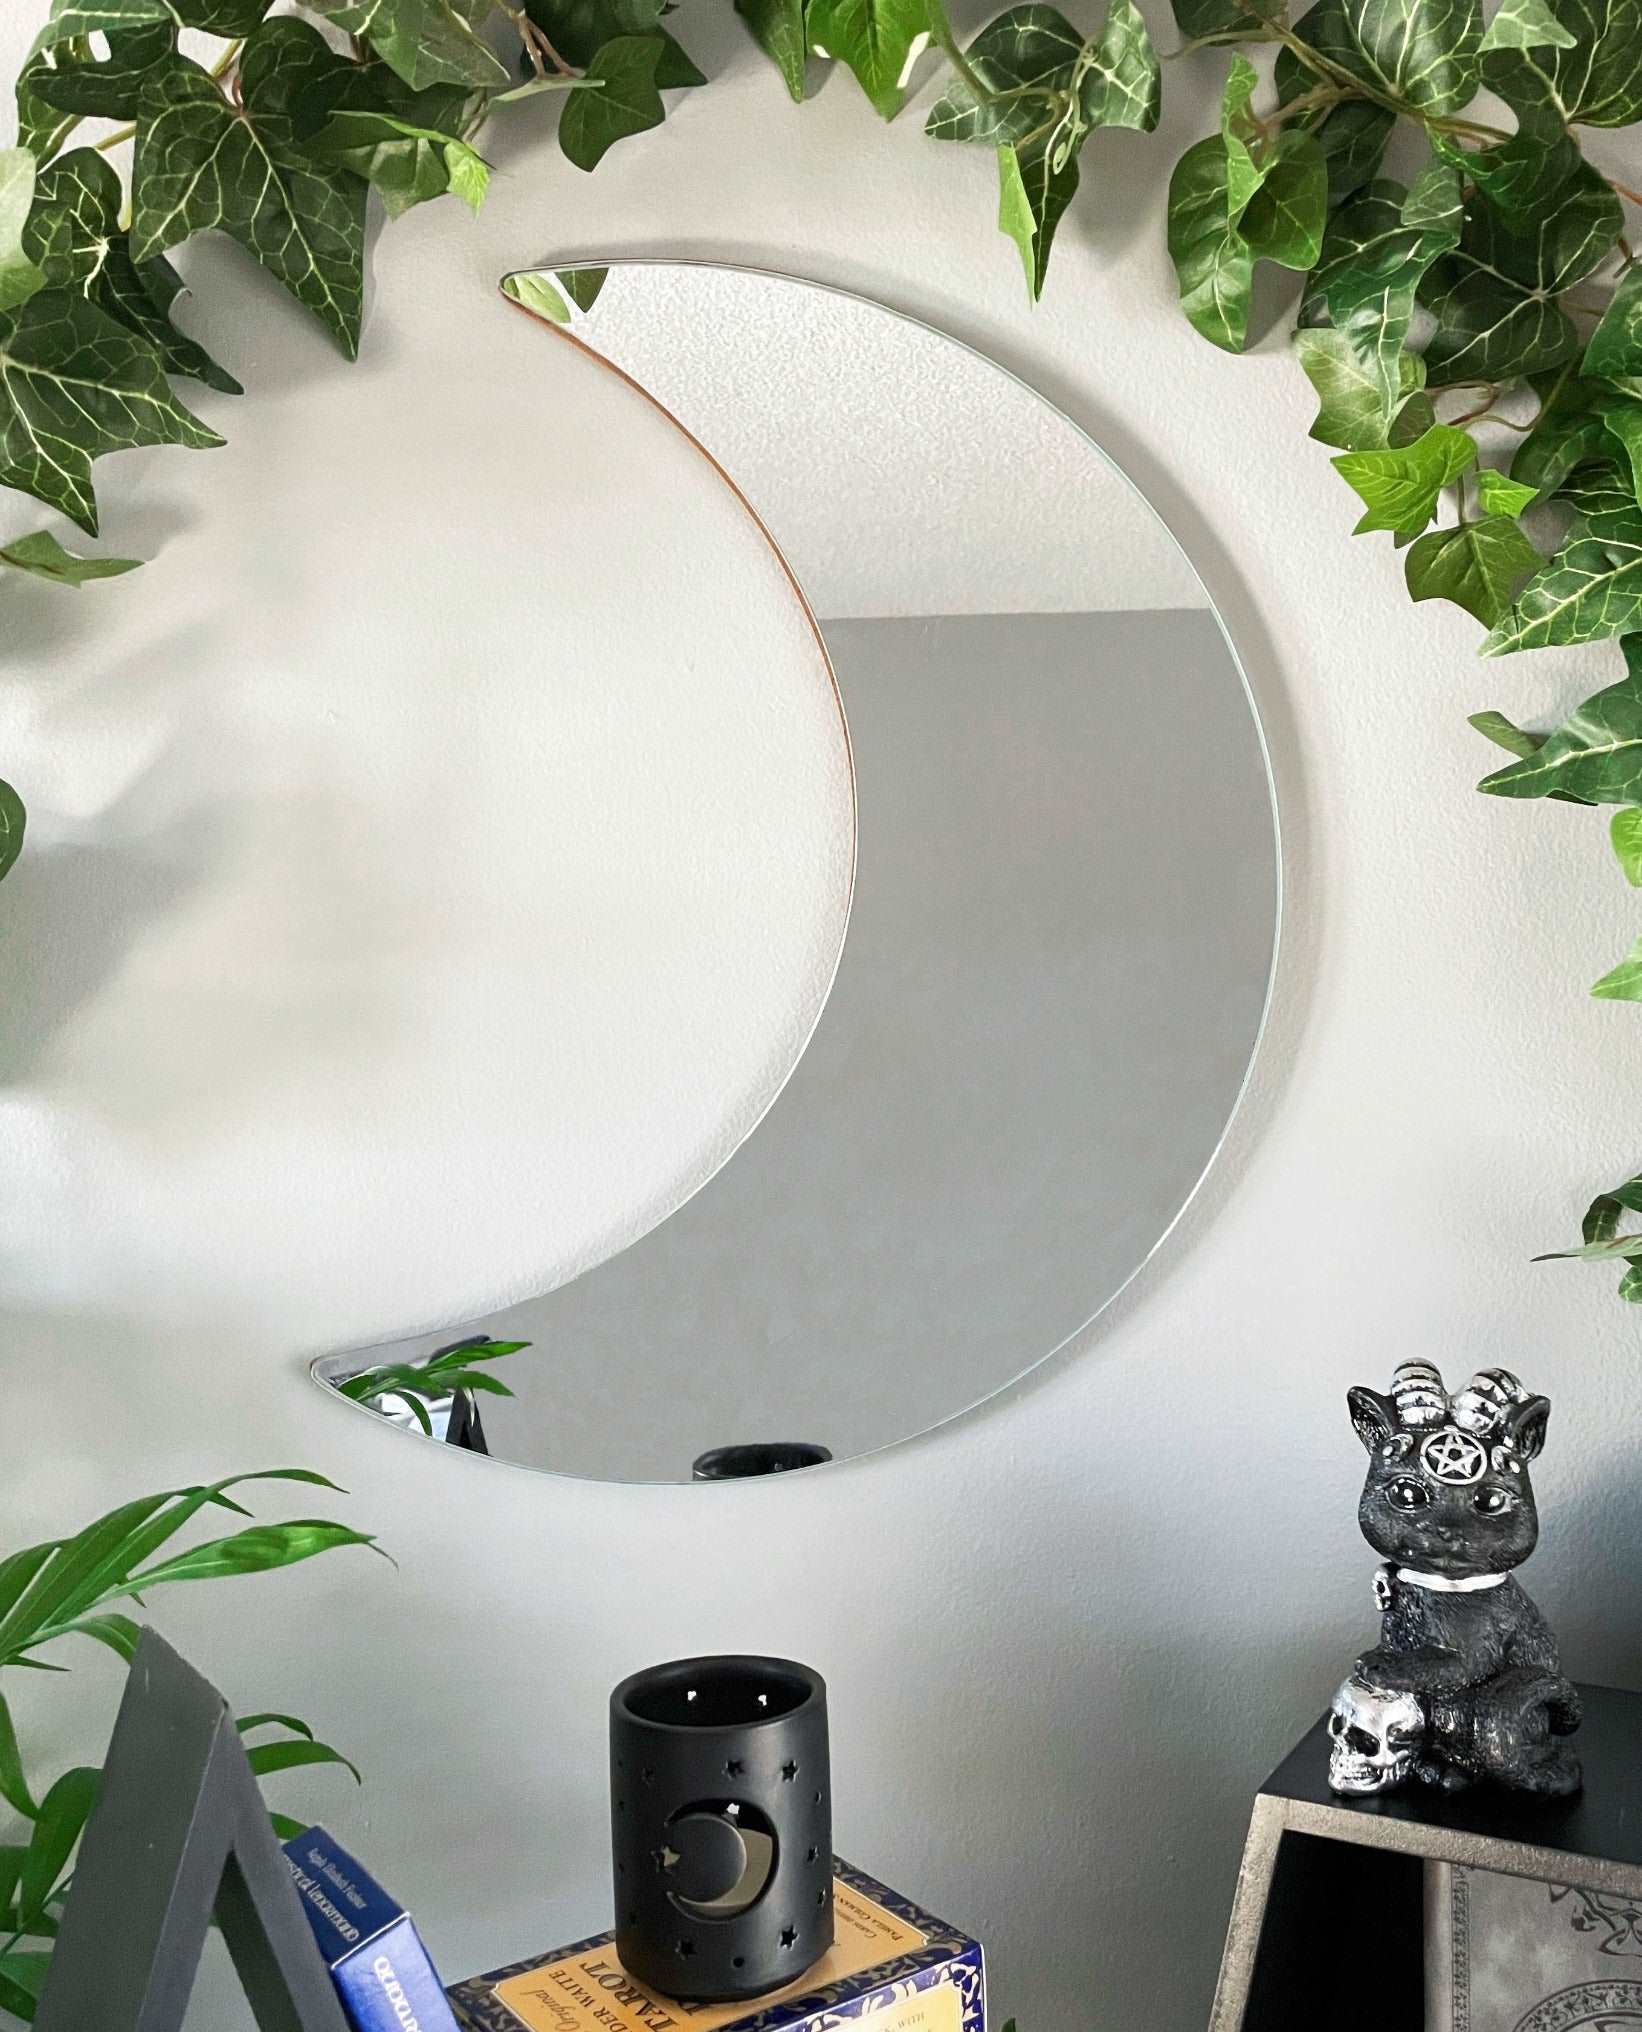 Pictured is a mirror shaped like a crescent moon.